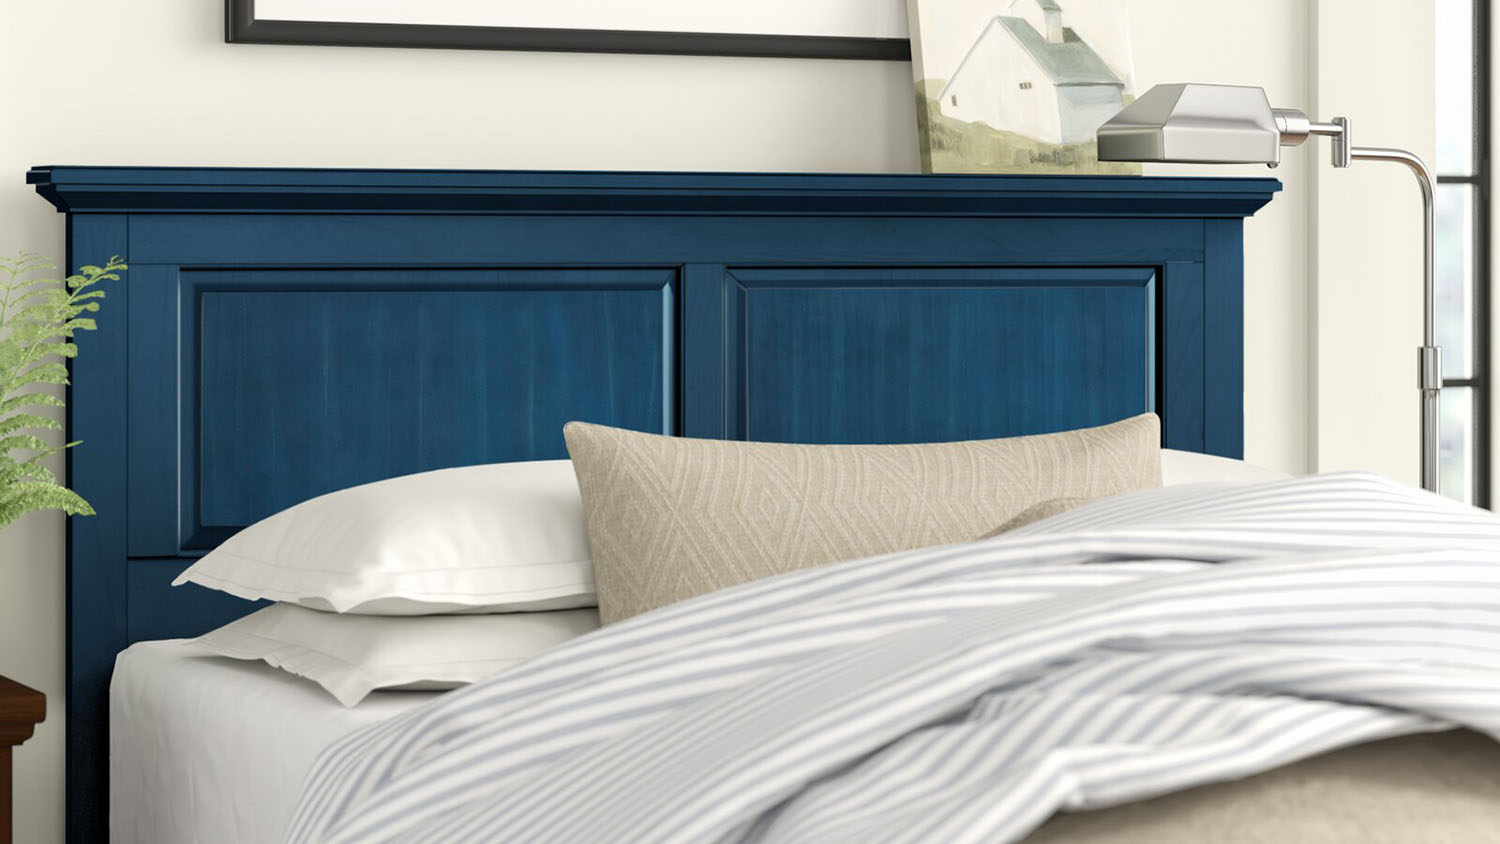 15 Best Headboards For Adjustable Beds, Can You Attach A Headboard And Footboard To An Adjustable Bed